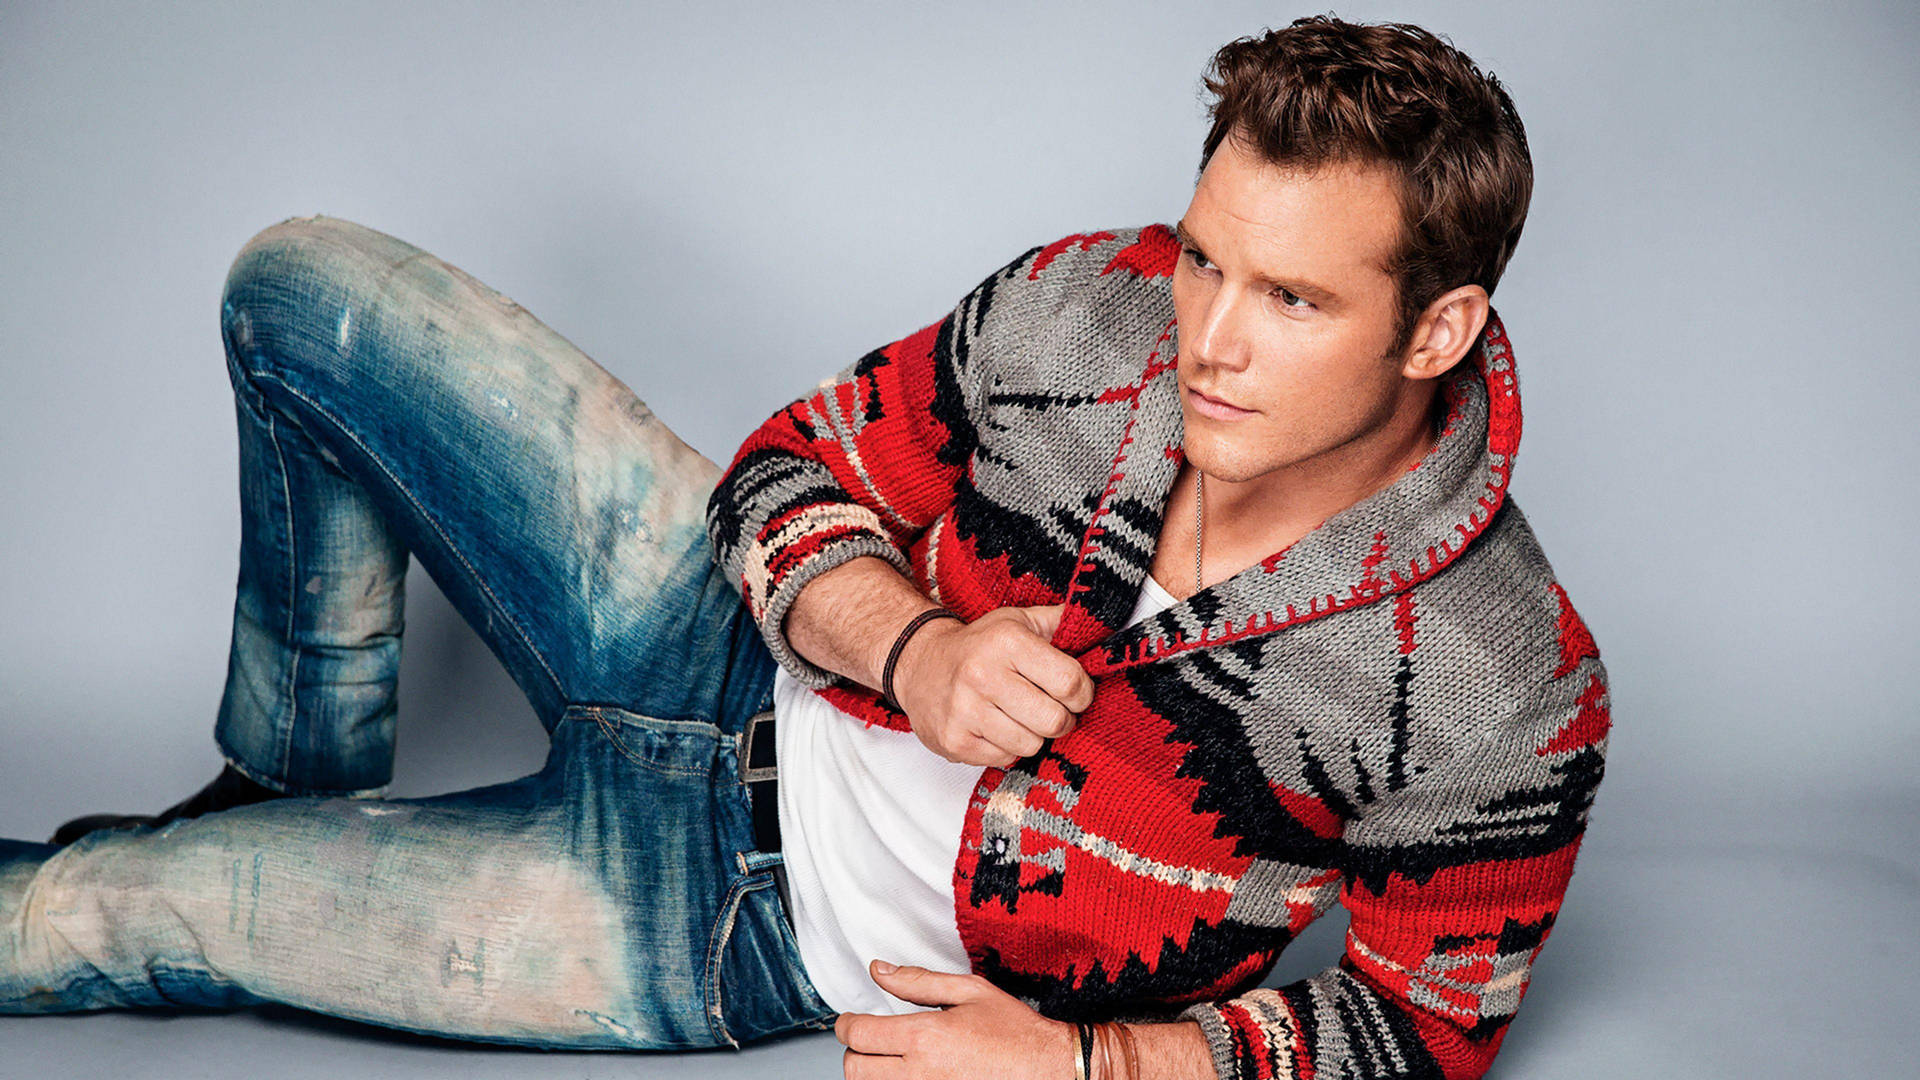 Catch A Glimpse Of The Talented Hollywood Actor, Chris Pratt In His Charismatic Glory.